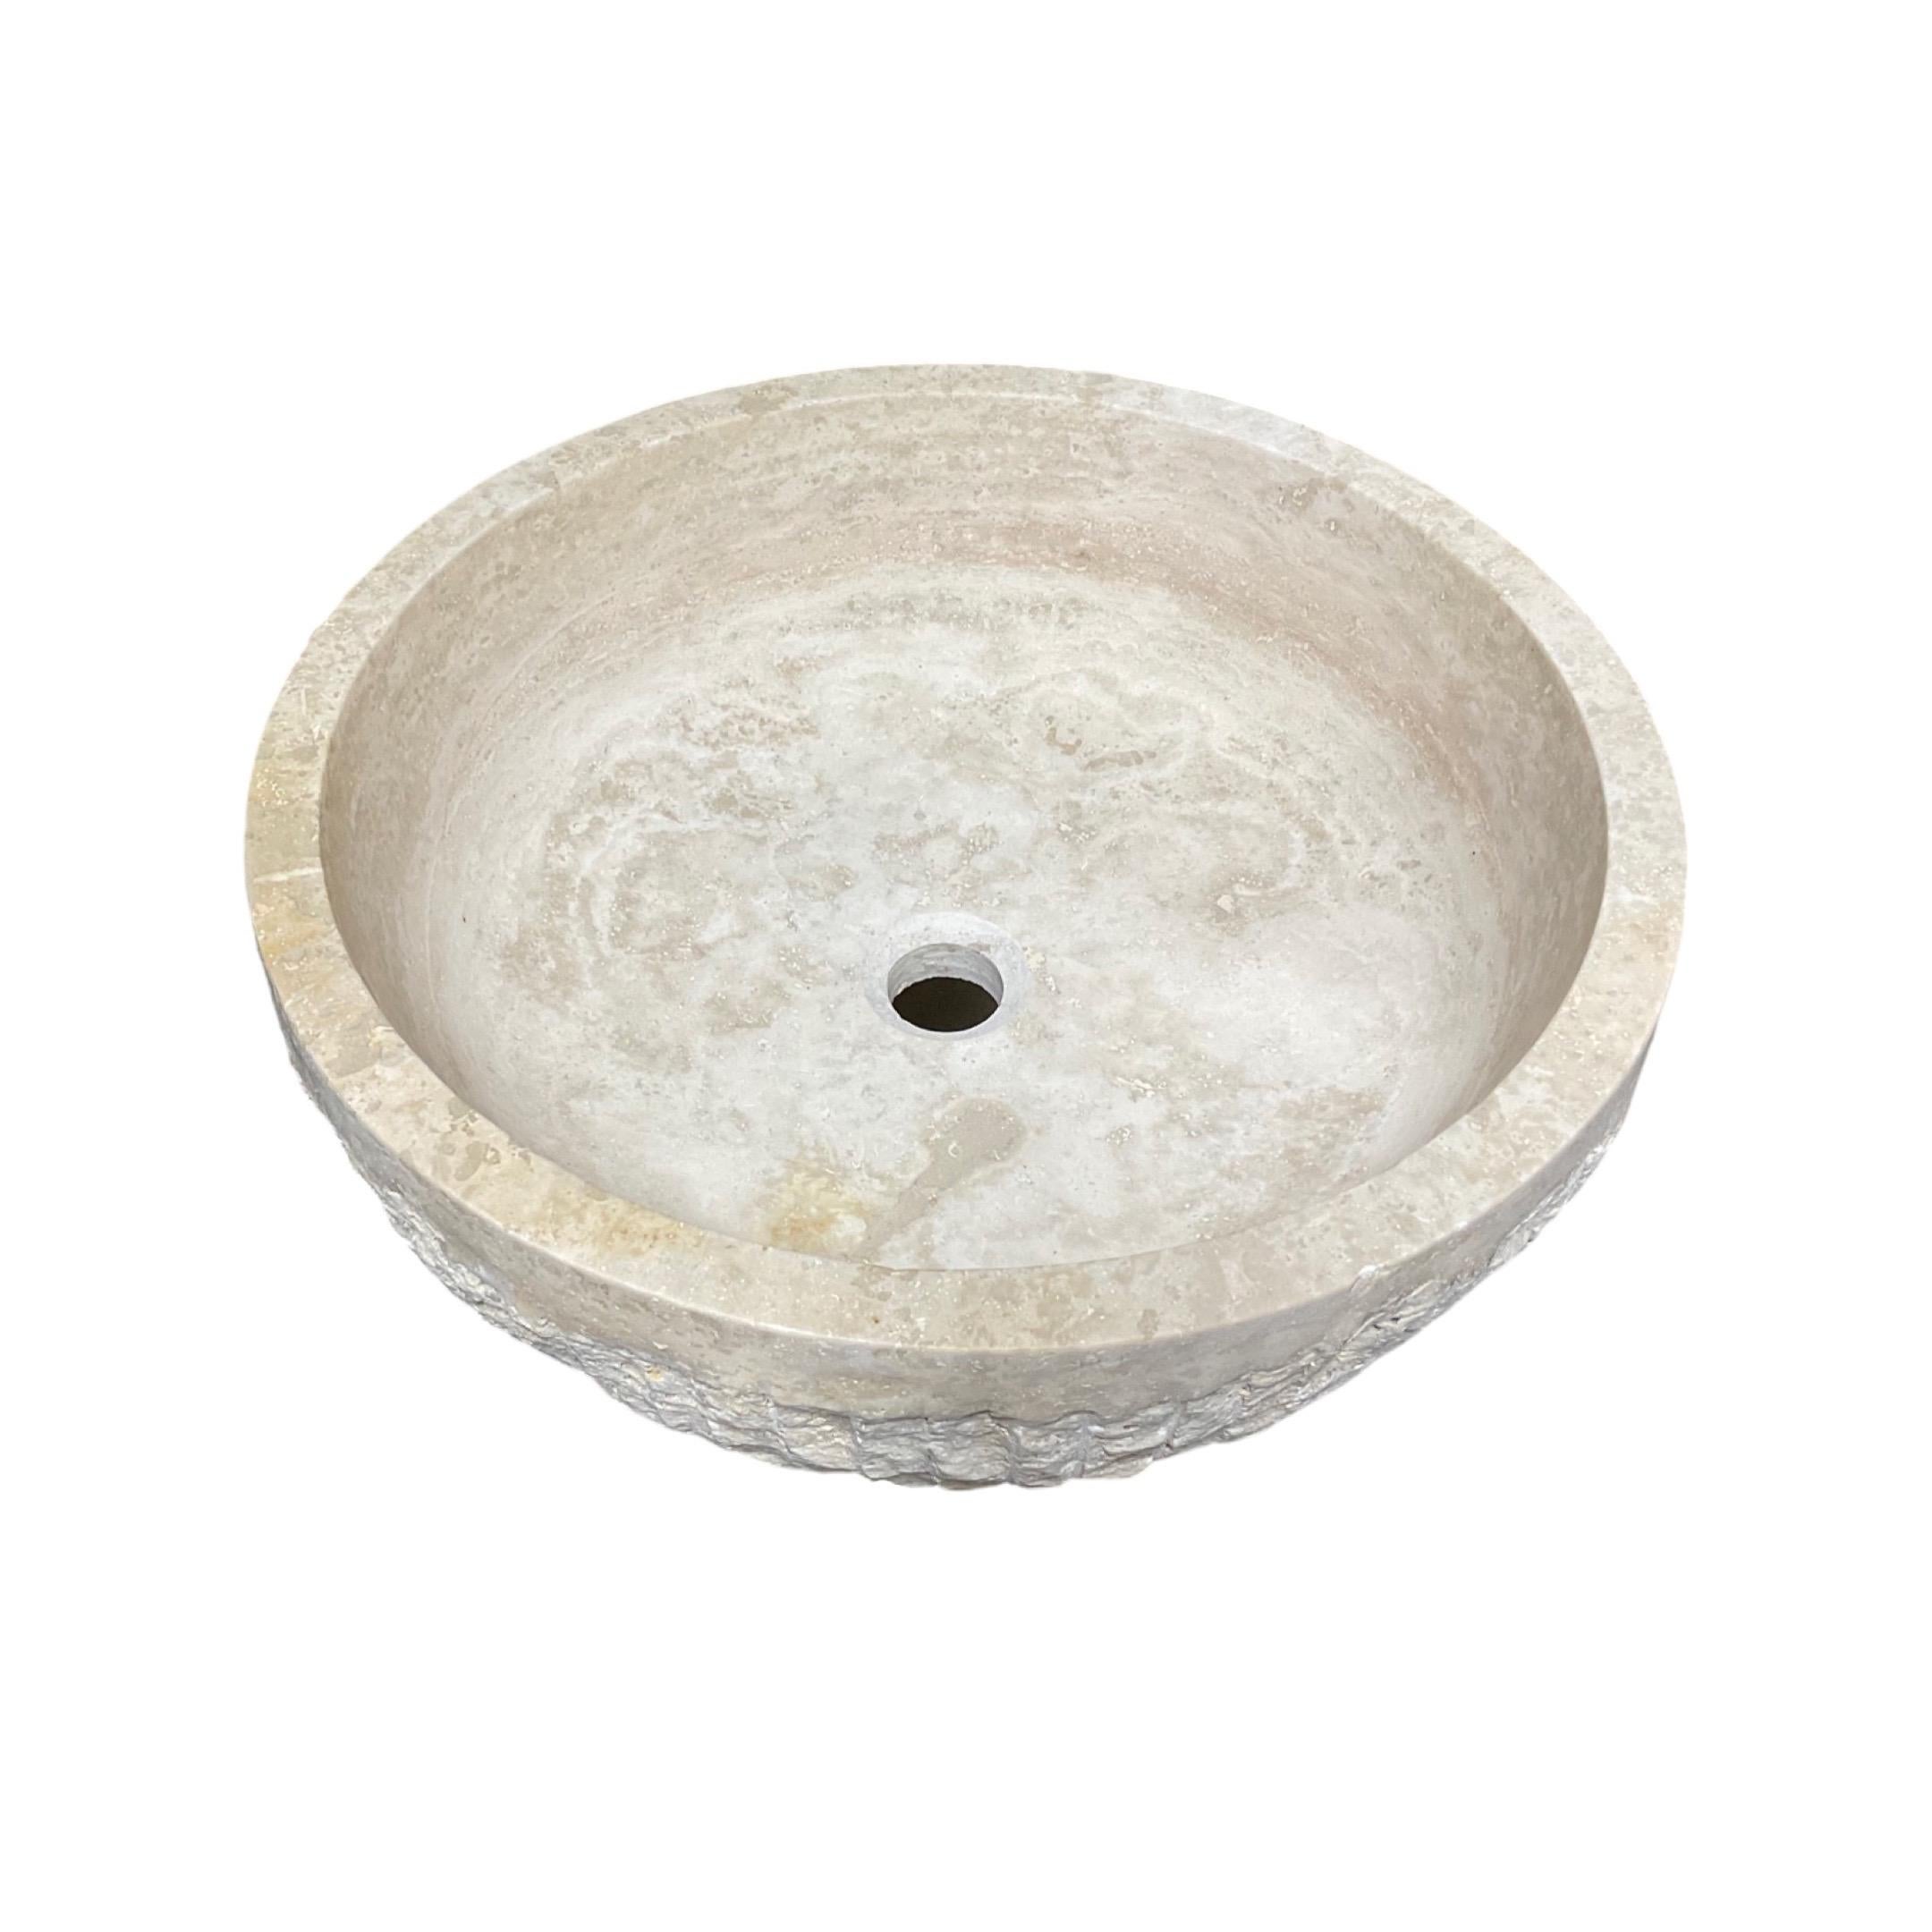 Greece Travertine Sink Bowl In Good Condition For Sale In Dallas, TX